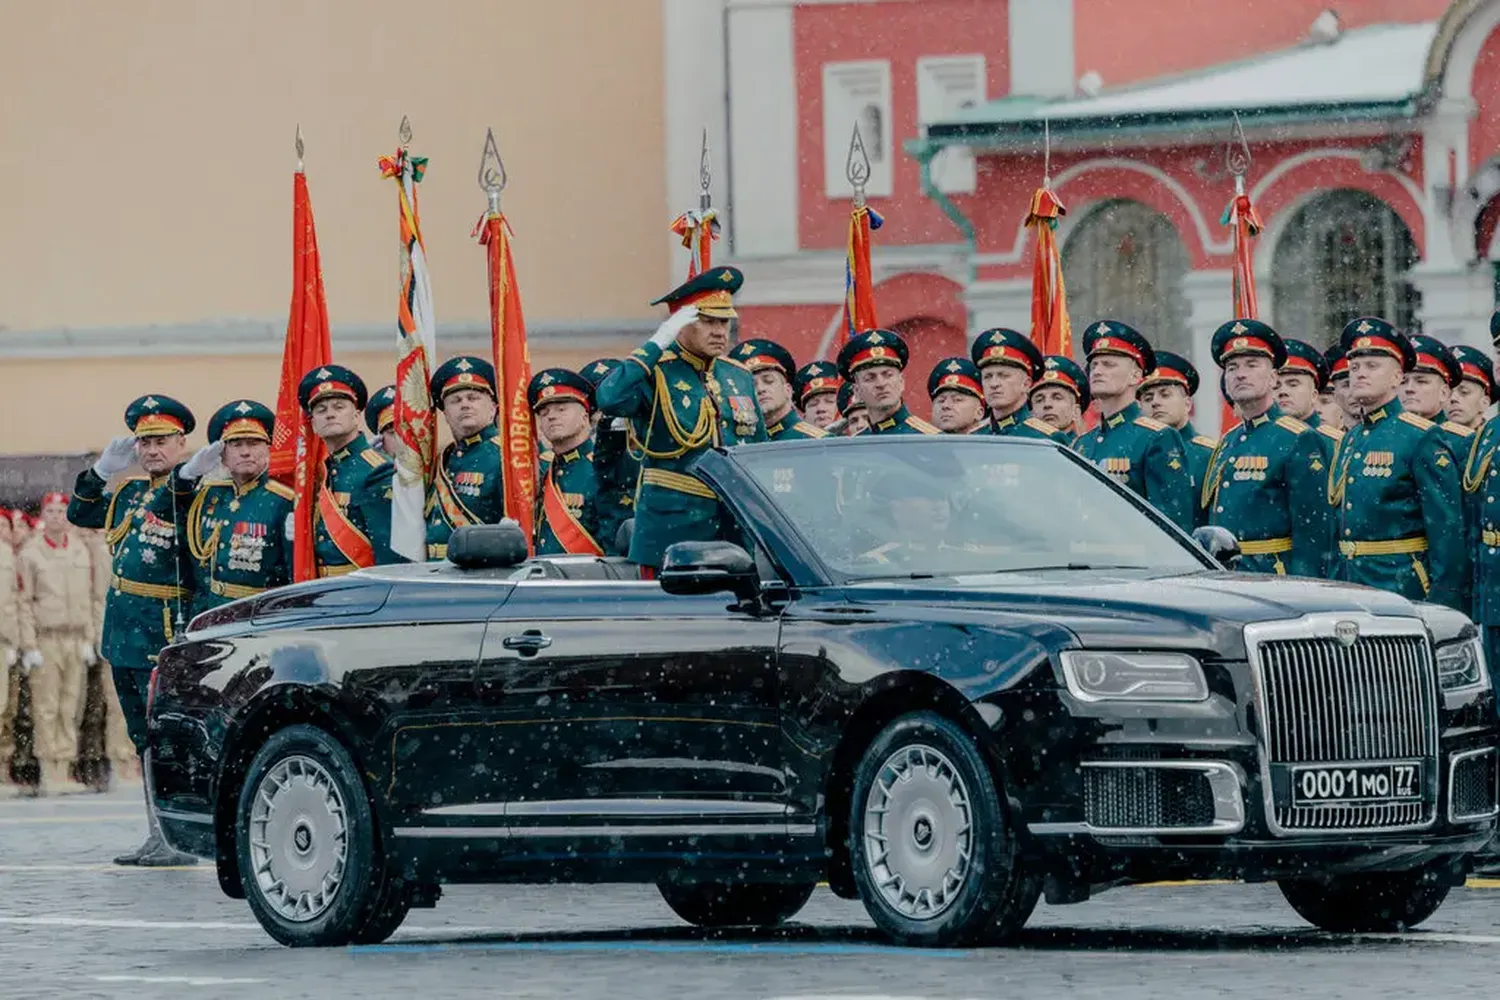 Sergei K. Shoigu at the Victory Day military parade in Moscow this month